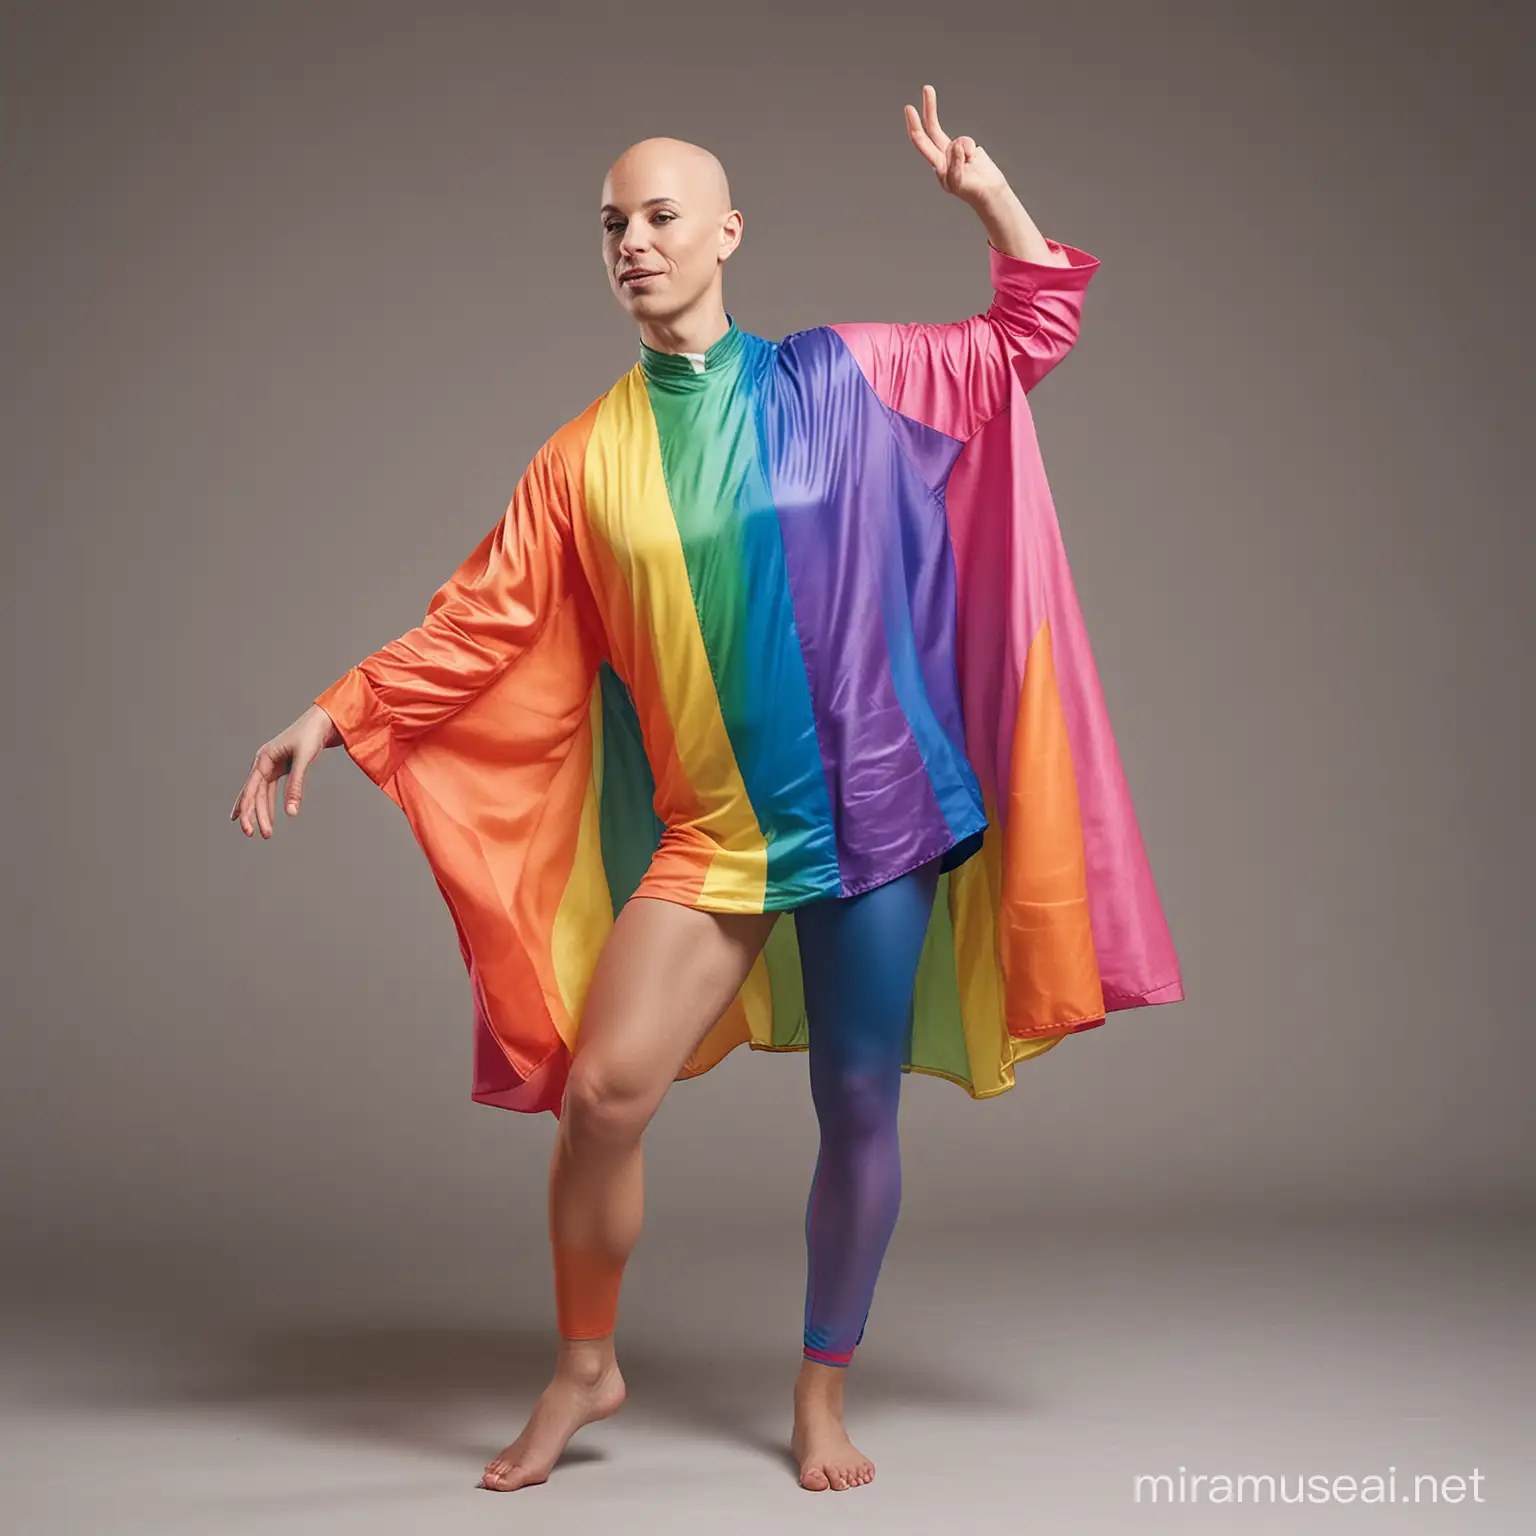 A young man in his forties, with a bald head and a feminine body, wearing women’s clothing and no hair, swaying with sexual gestures and obscene gestures. He wears rainbow gay attire